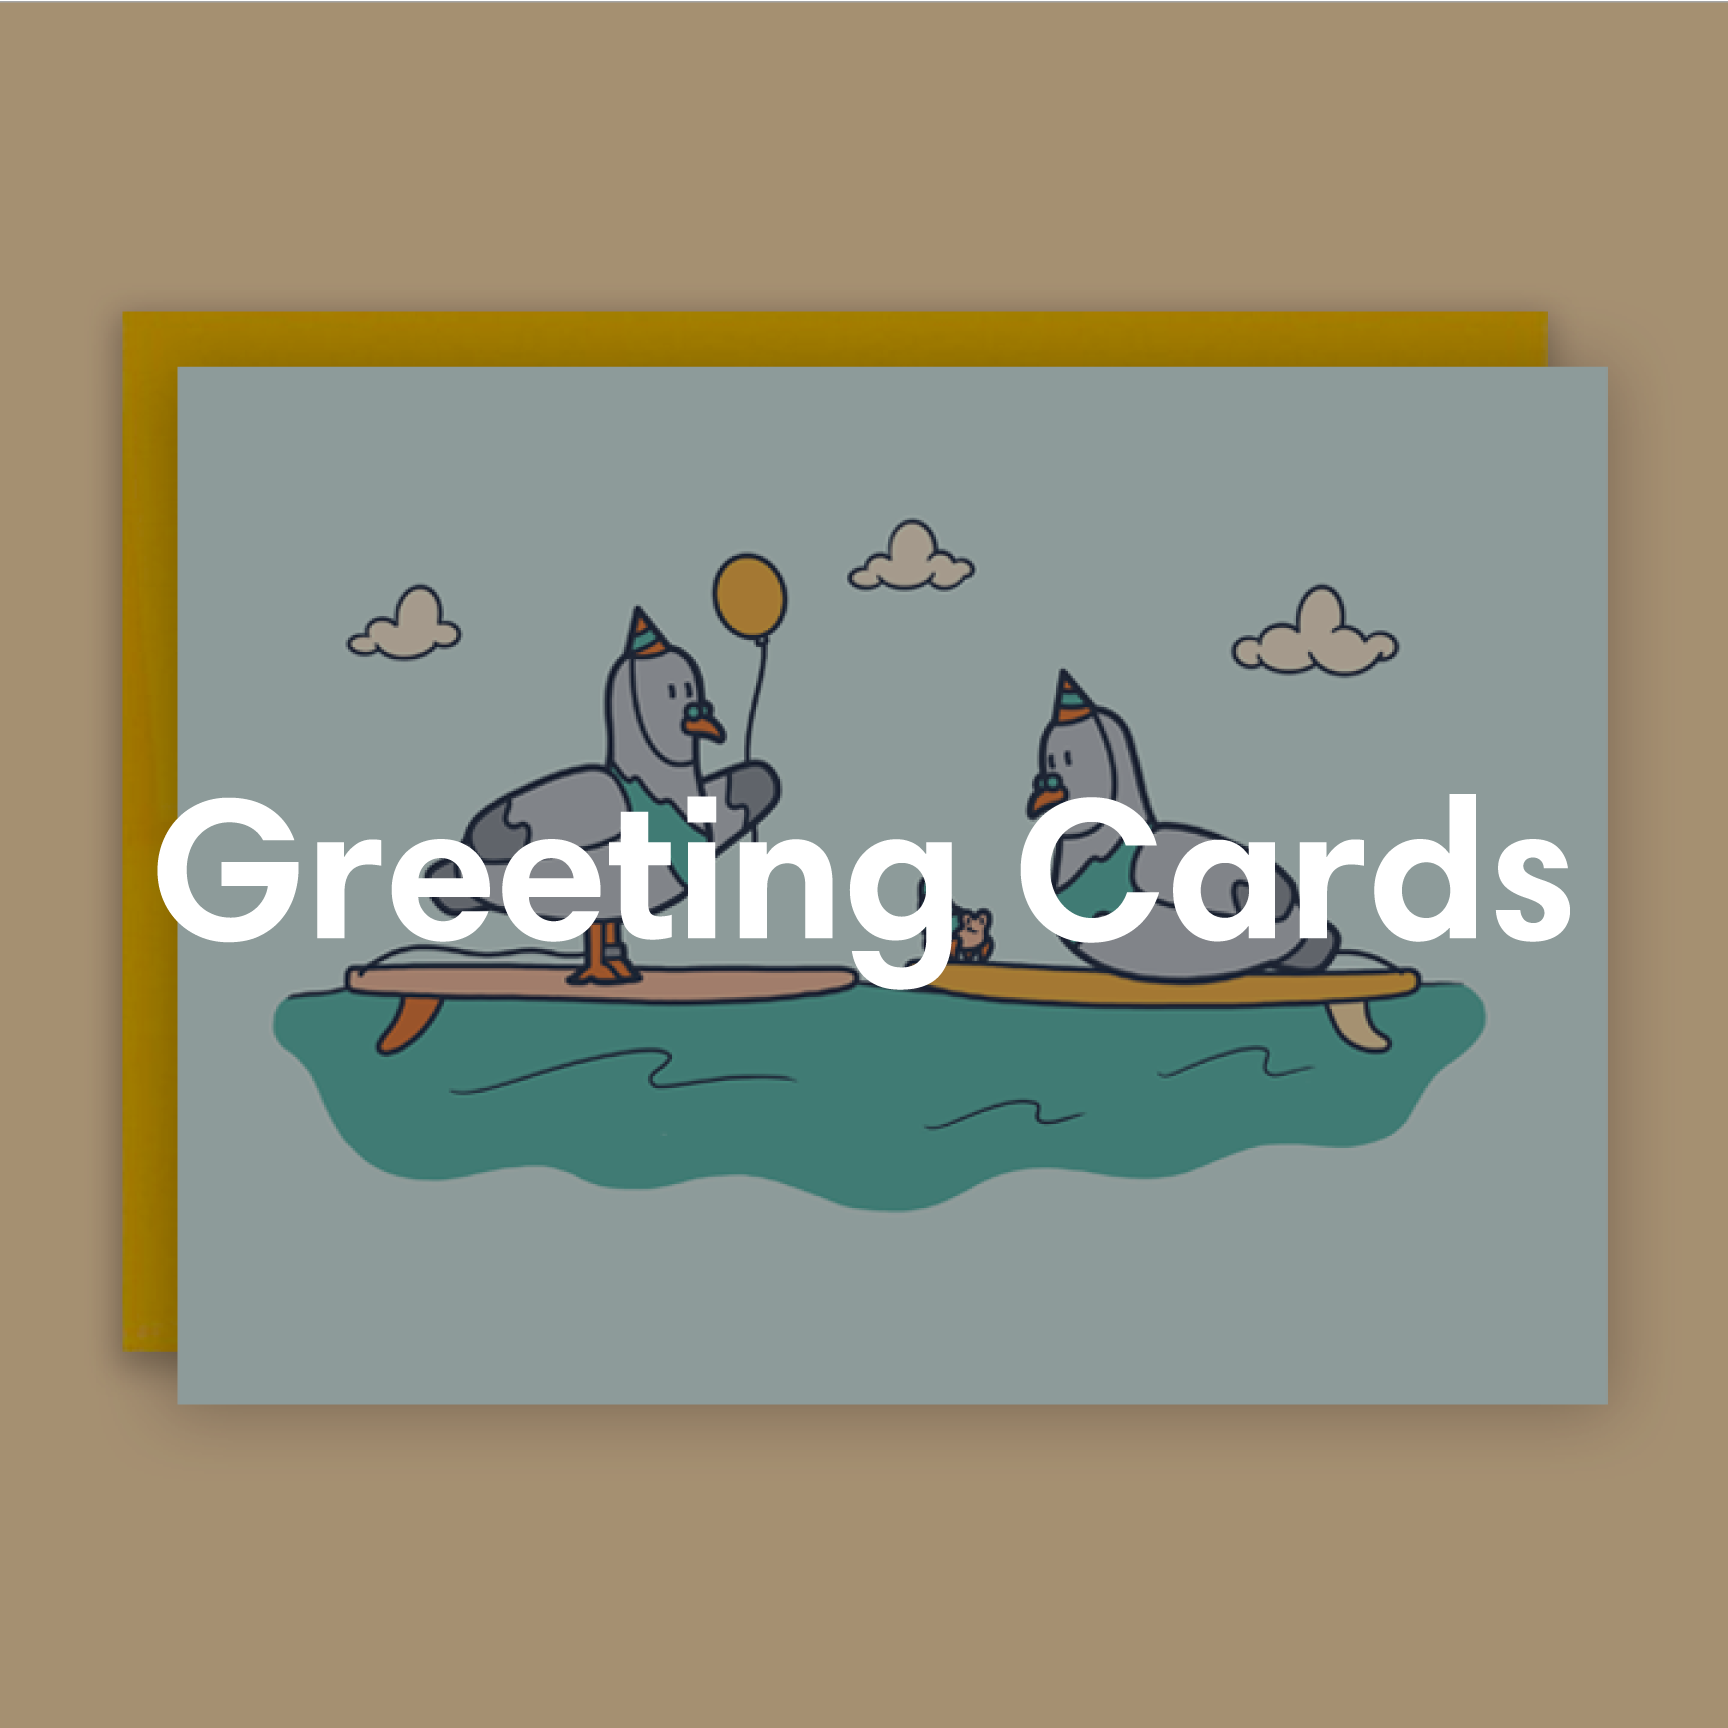 Greeting Cards Home Page Menu Tile